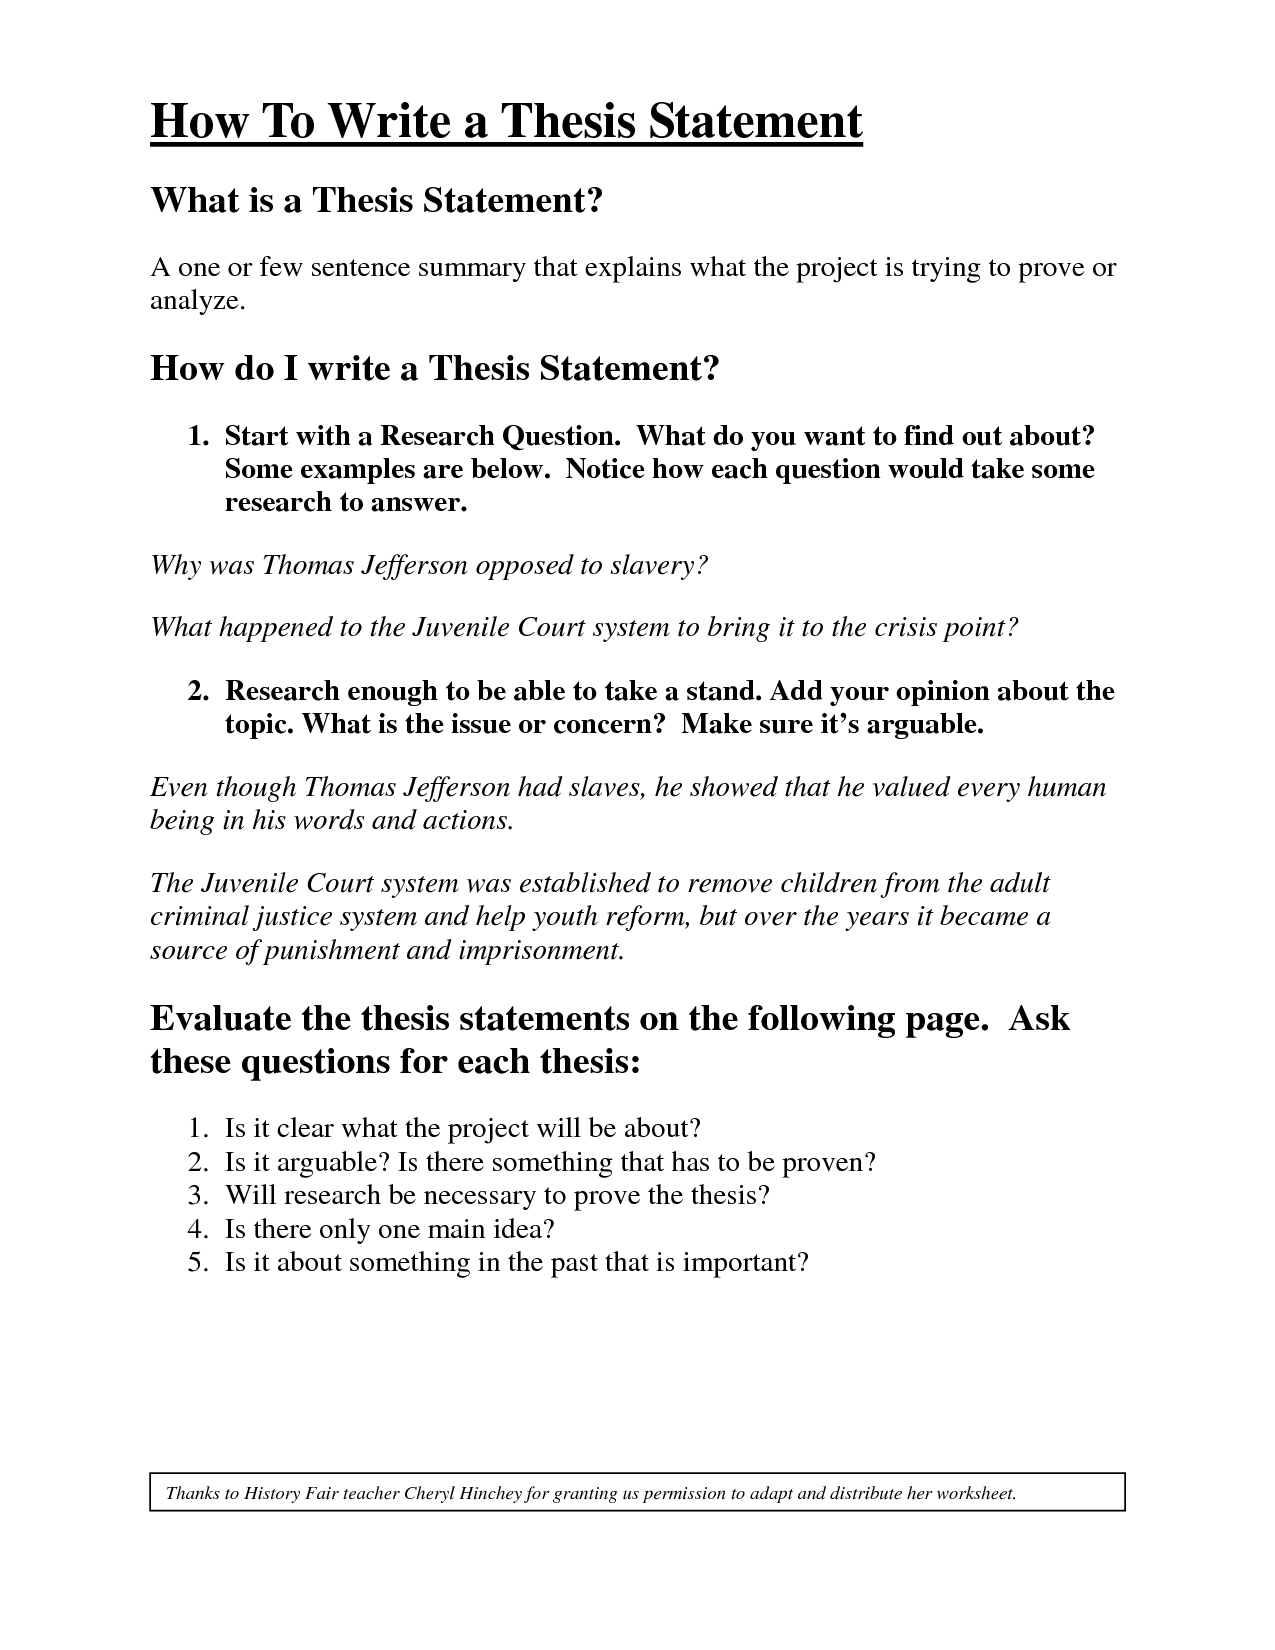 Thesis statement formats